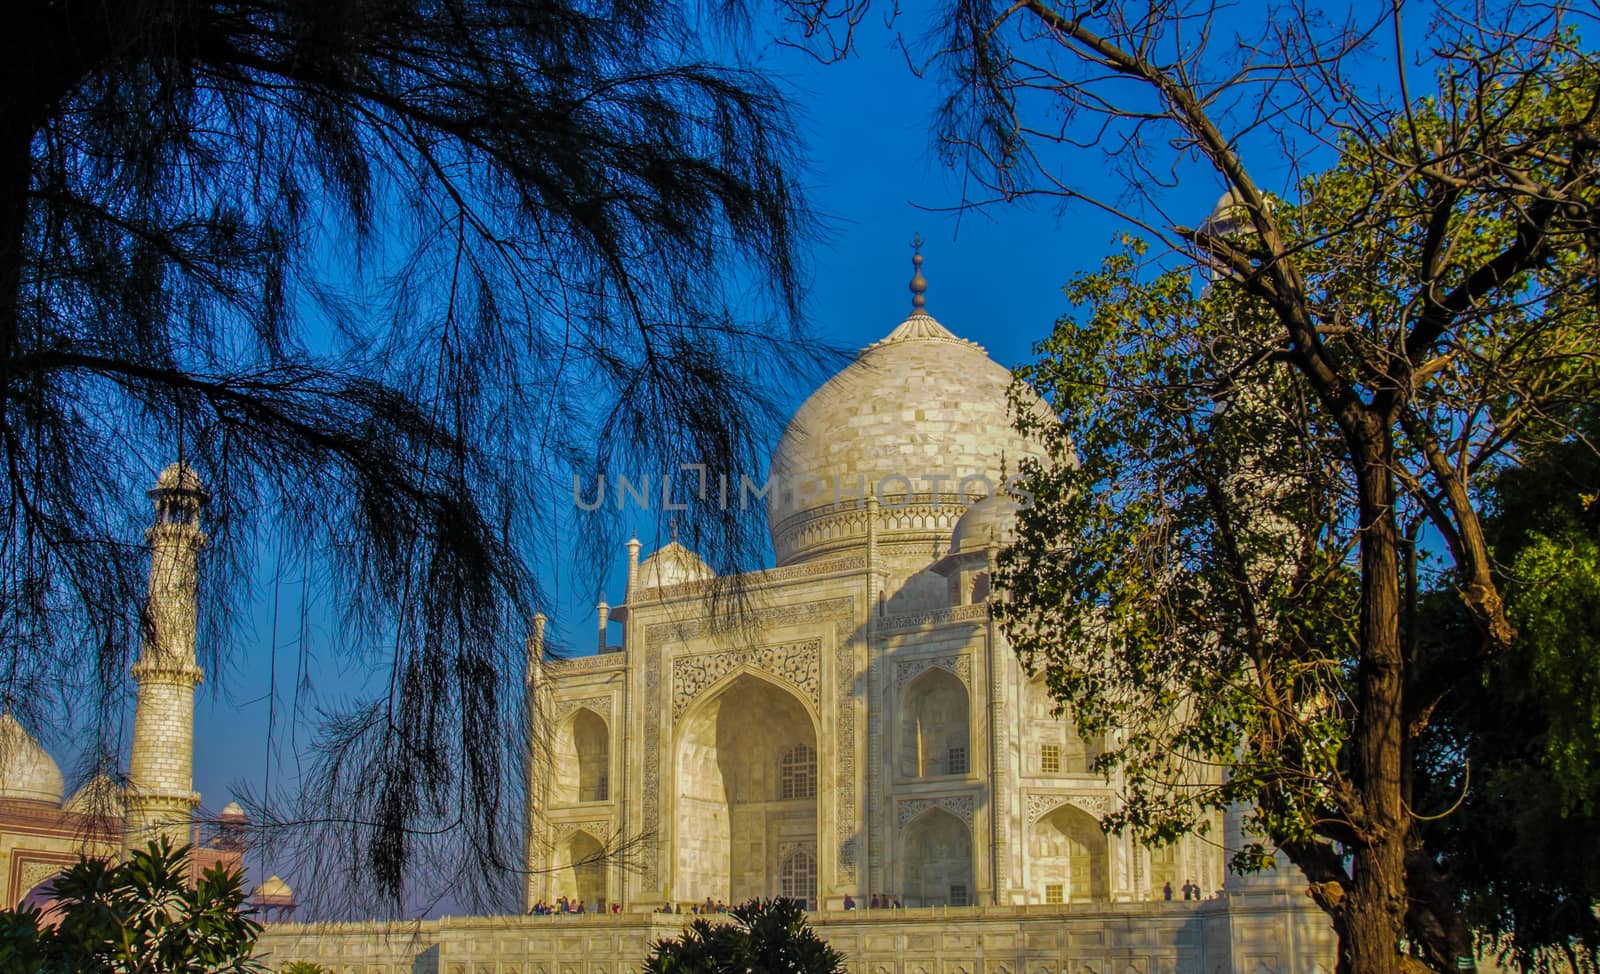 The Light Golden Yellow Hues  of the sun on the Taj as seen here, framed by trees on either side on a winter morning with a clear Blue sky, impart it an eternal beauty all its own.